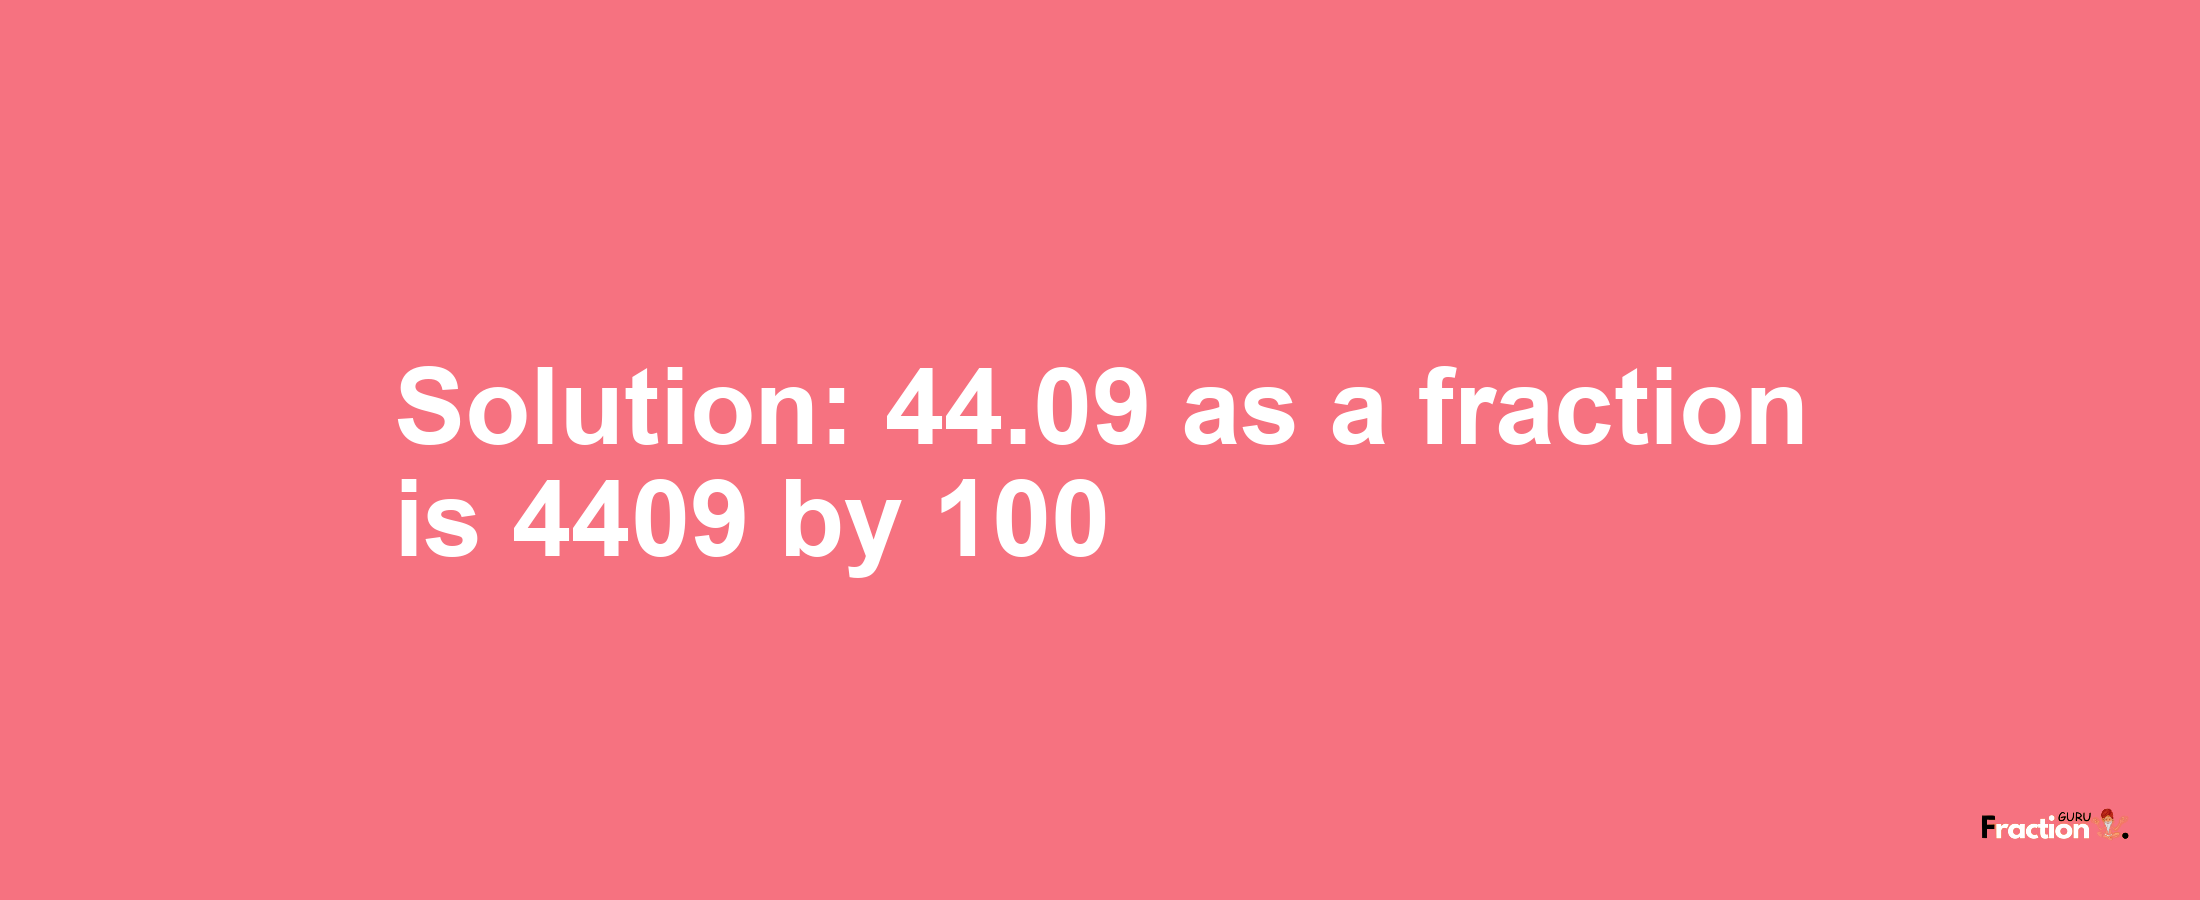 Solution:44.09 as a fraction is 4409/100